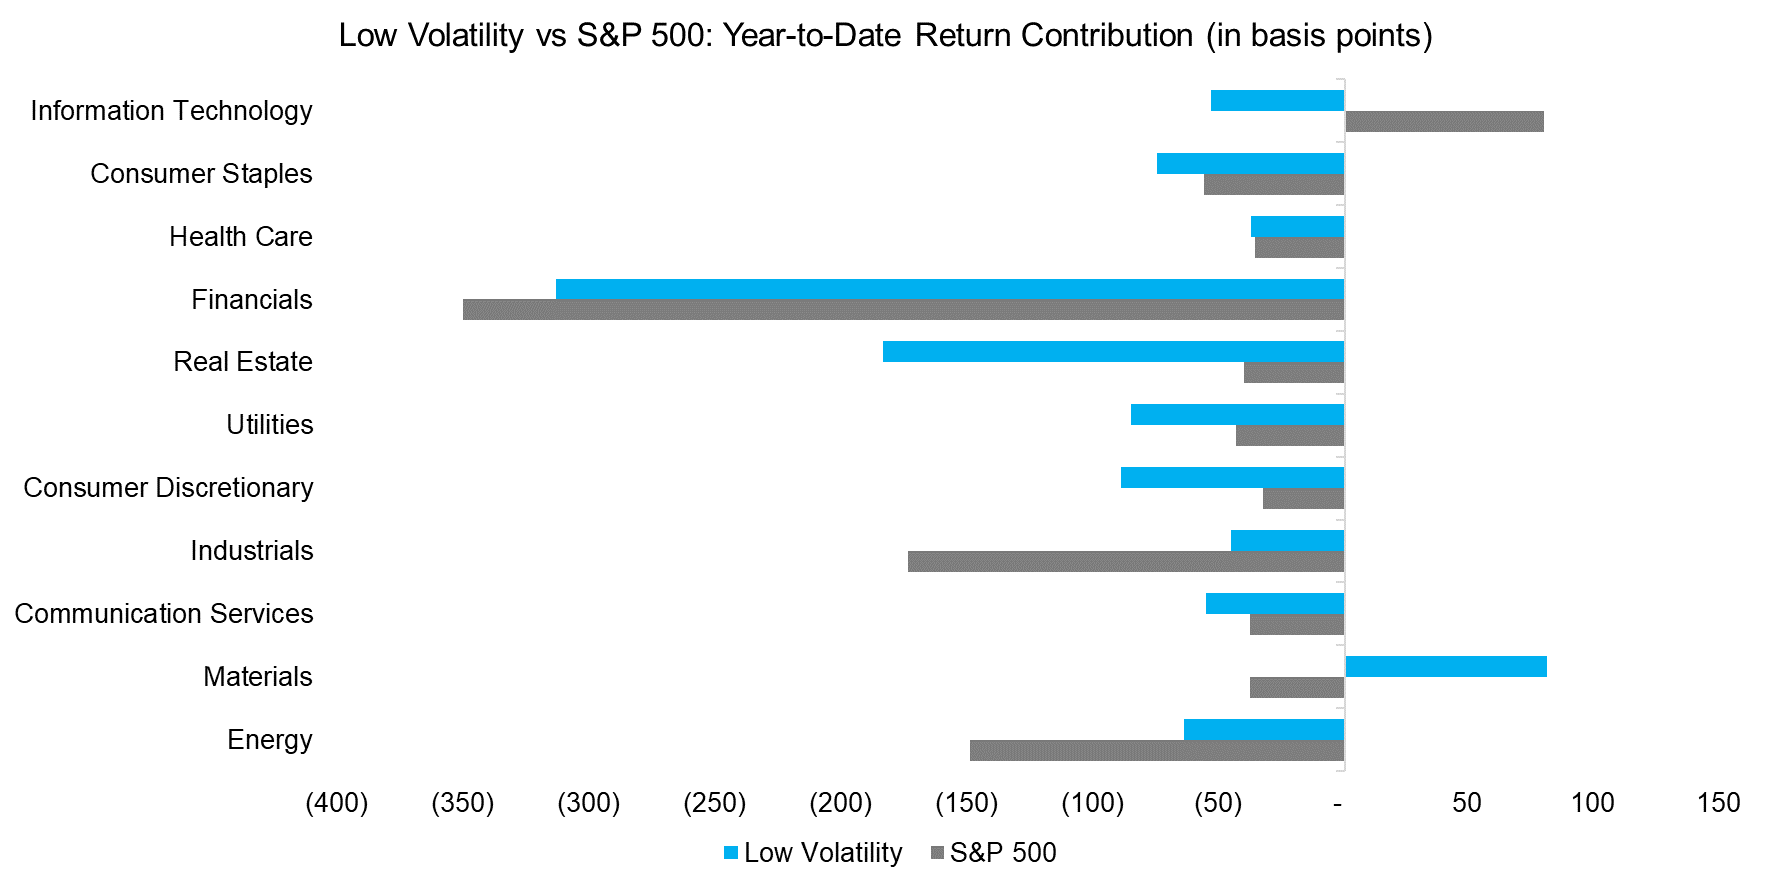 Low Volatility vs S&P 500 Year-to-Date Return Contribution (in basis points)